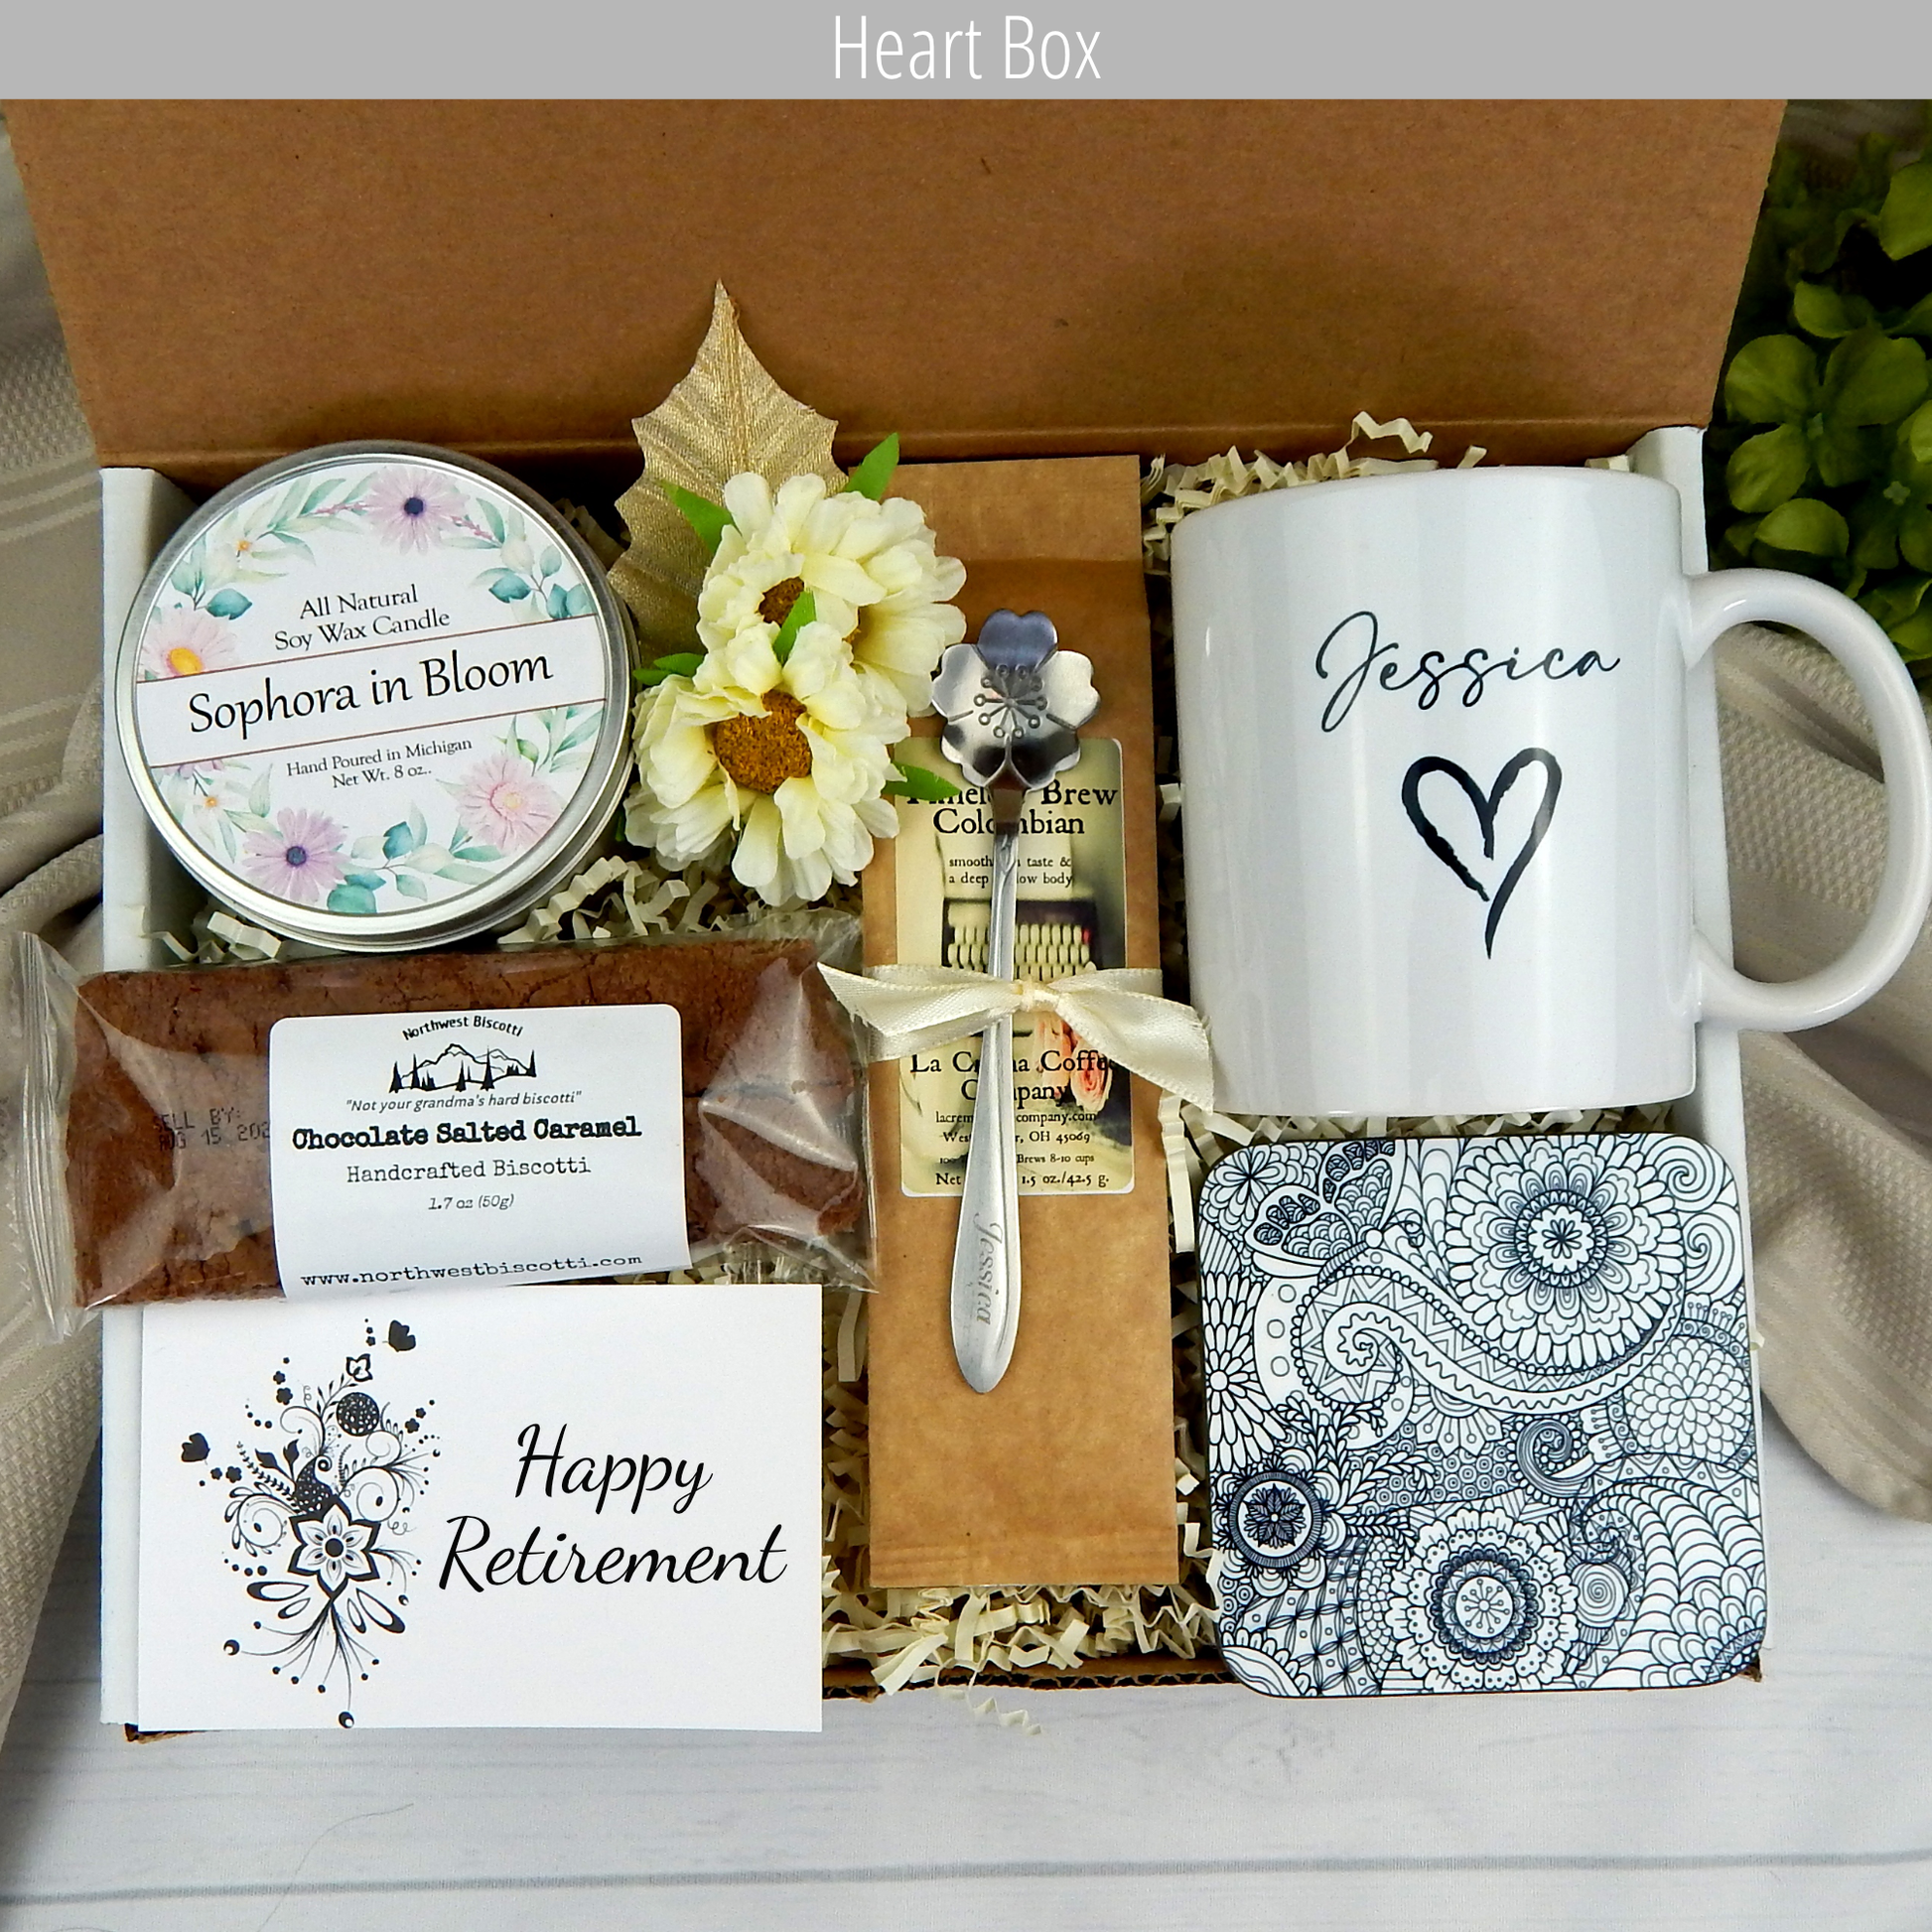 Retiring in style: Women's retirement gift basket featuring coffee, a customized mug, and sweet goodies for her journey.